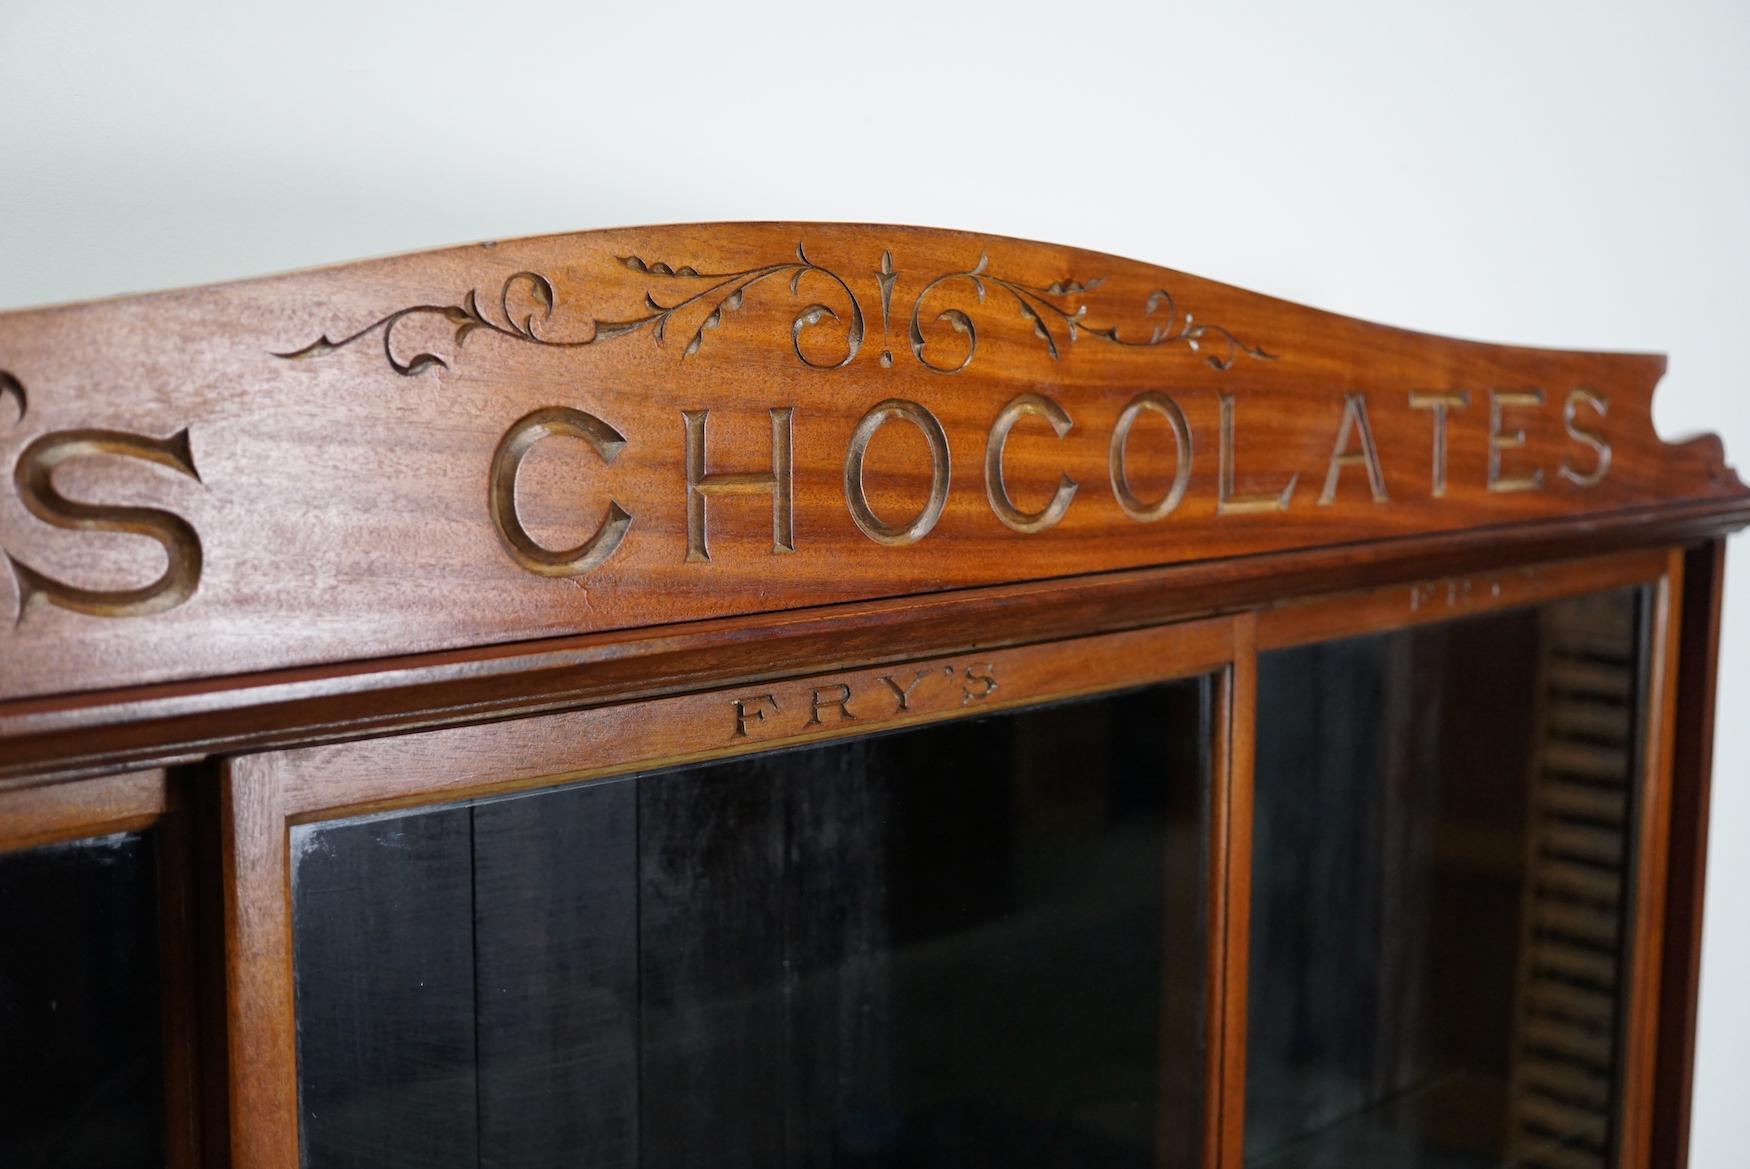 Fry's Chocolates Mahogany Shop Display Cabinet or Vitrine, Late 19th Century For Sale 1